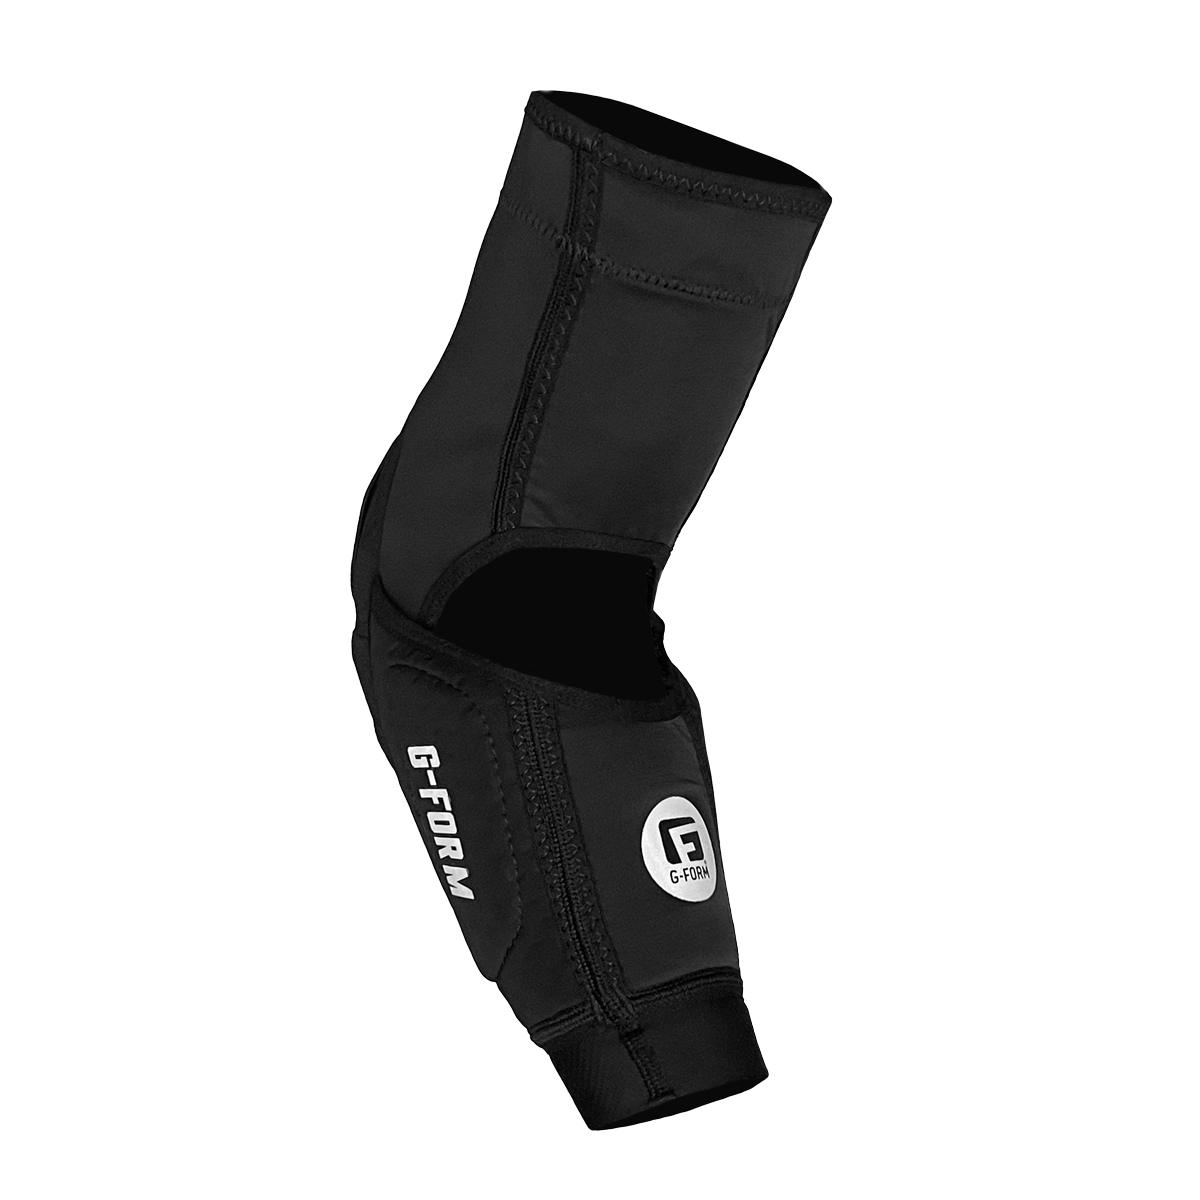 Mesa Spike Knee Guard Elbow Guard Knee Pads Elbow Pads Mountain Biking Gravity Protection Gear Product Image